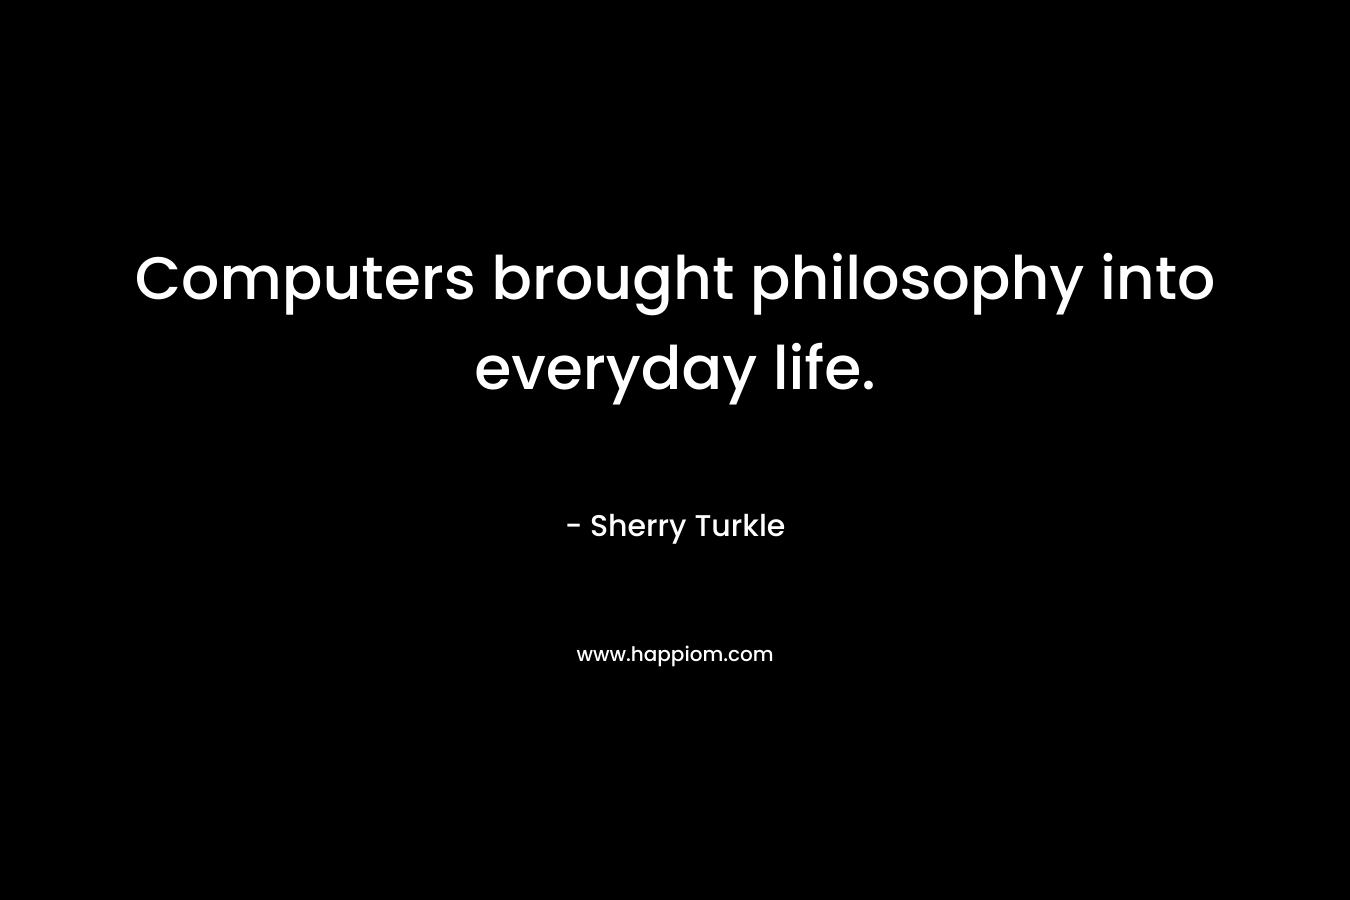 Computers brought philosophy into everyday life. – Sherry Turkle